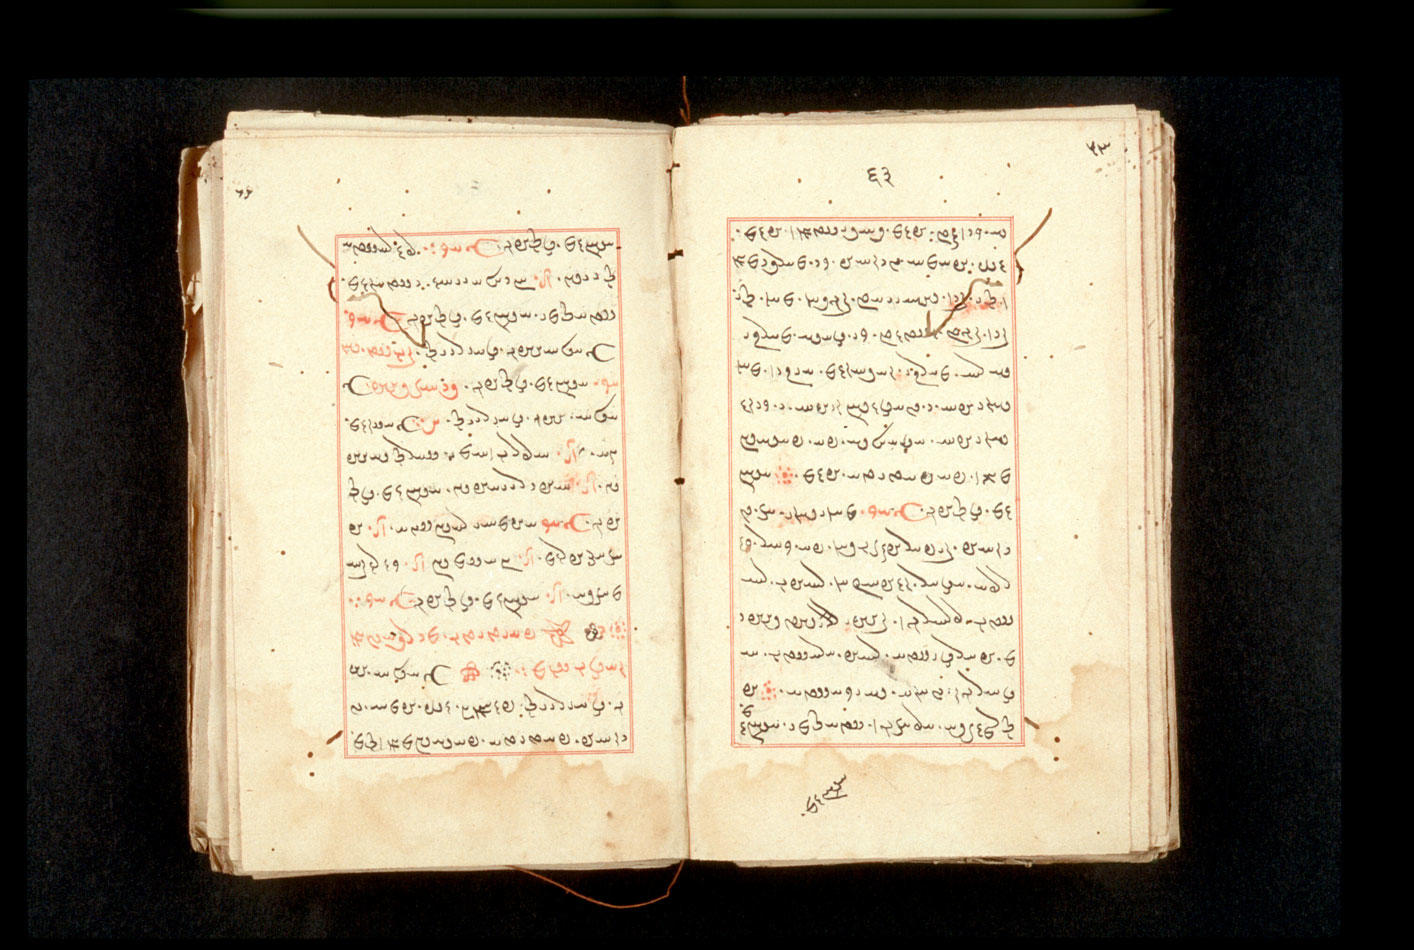 Folios 63v (right) and 64r (left)